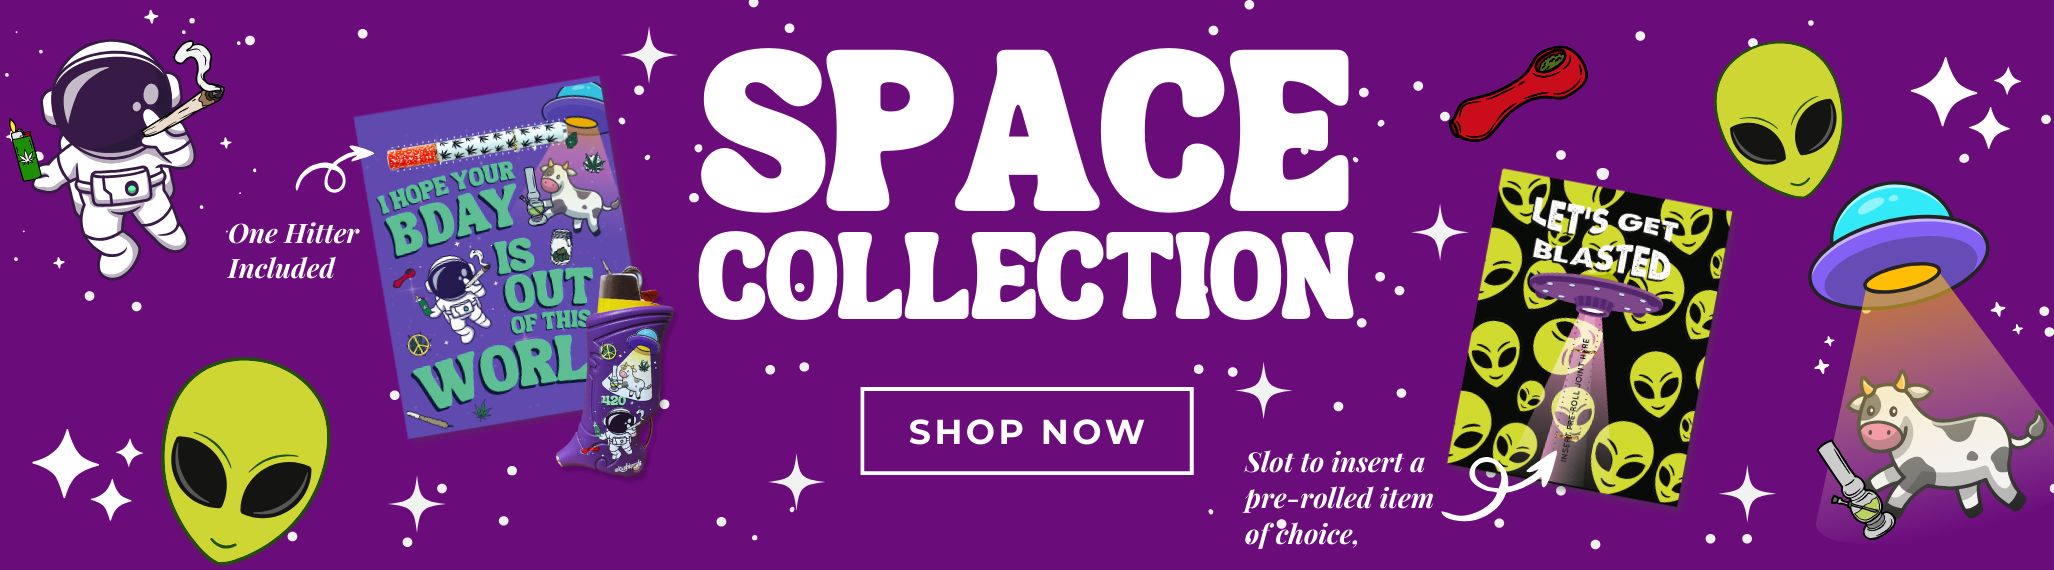 Purple background with the text 'Space Collection' and 'Shop Now' button, decorated with stars and cosmic elements.